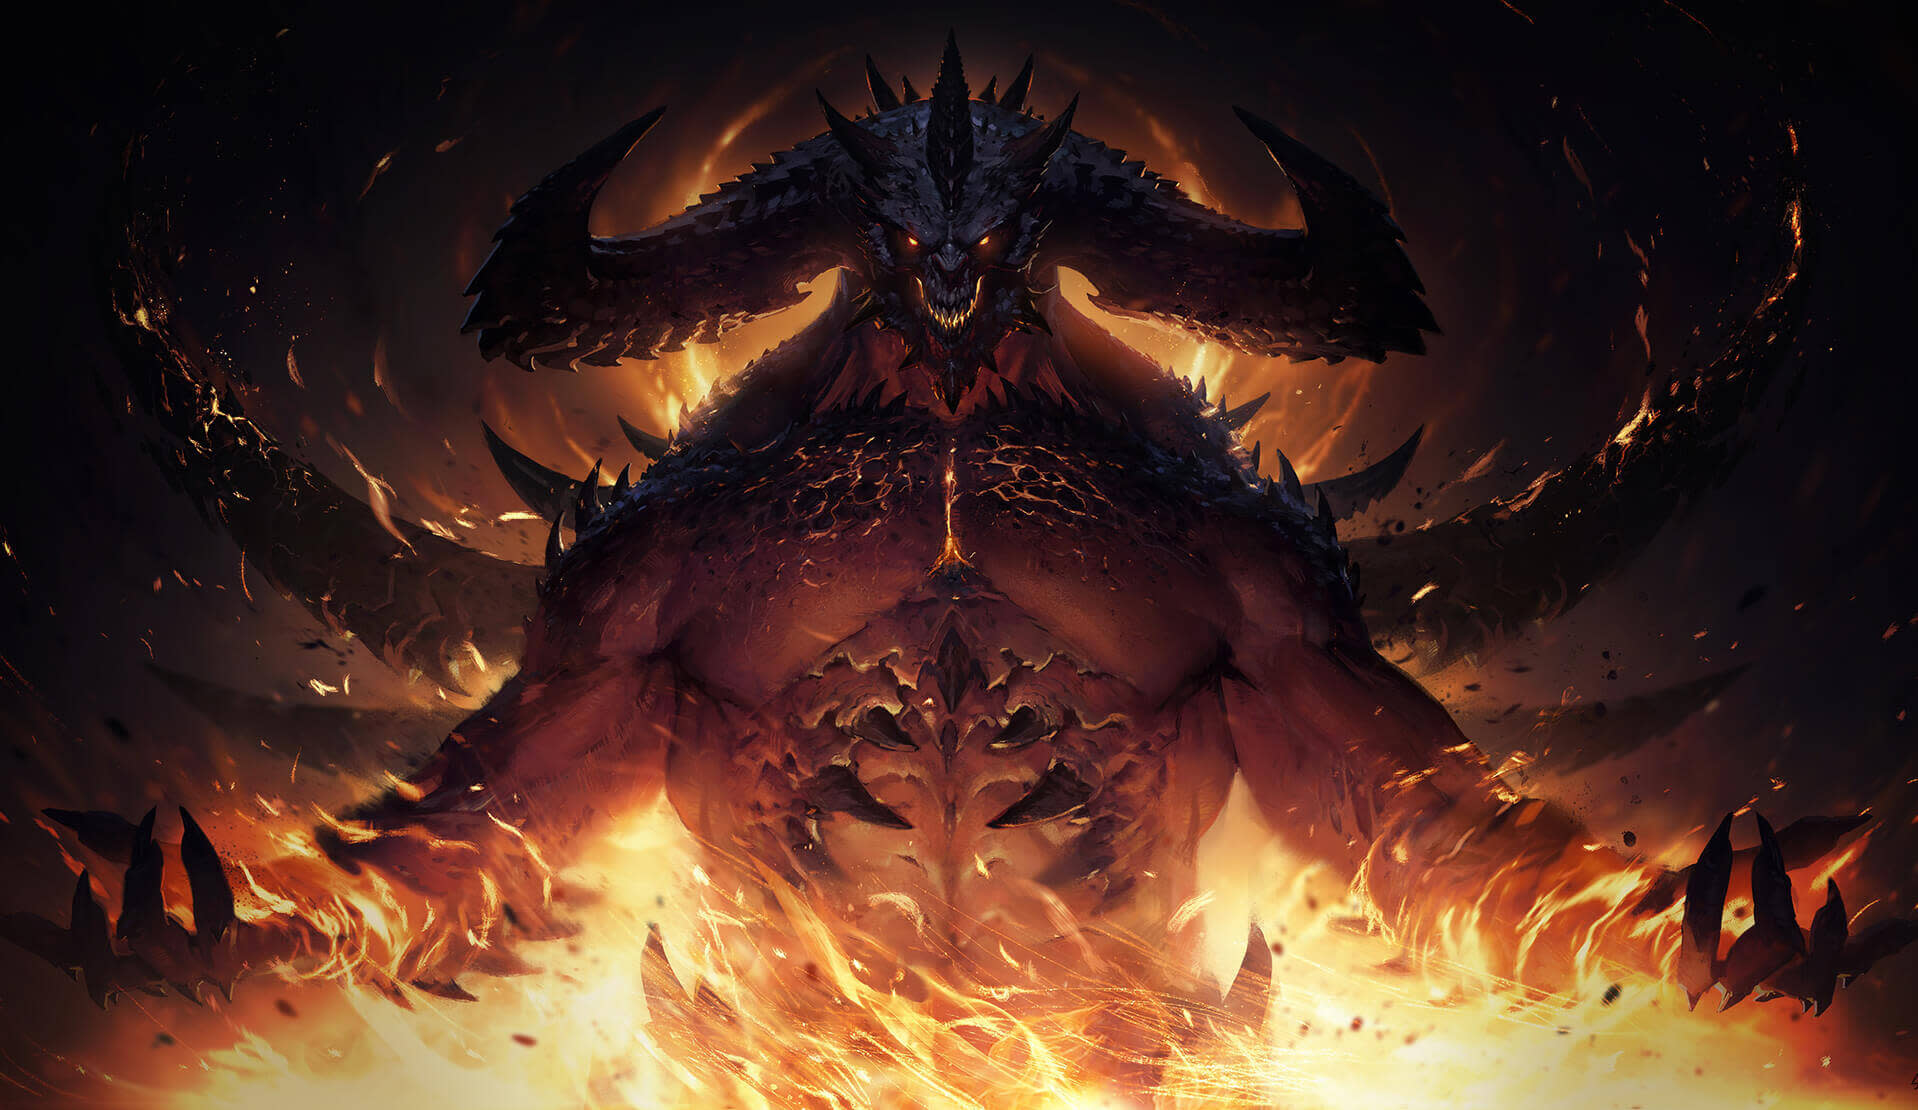 Diablo Immortal brought $100,000,000 to developers in less than two months after release